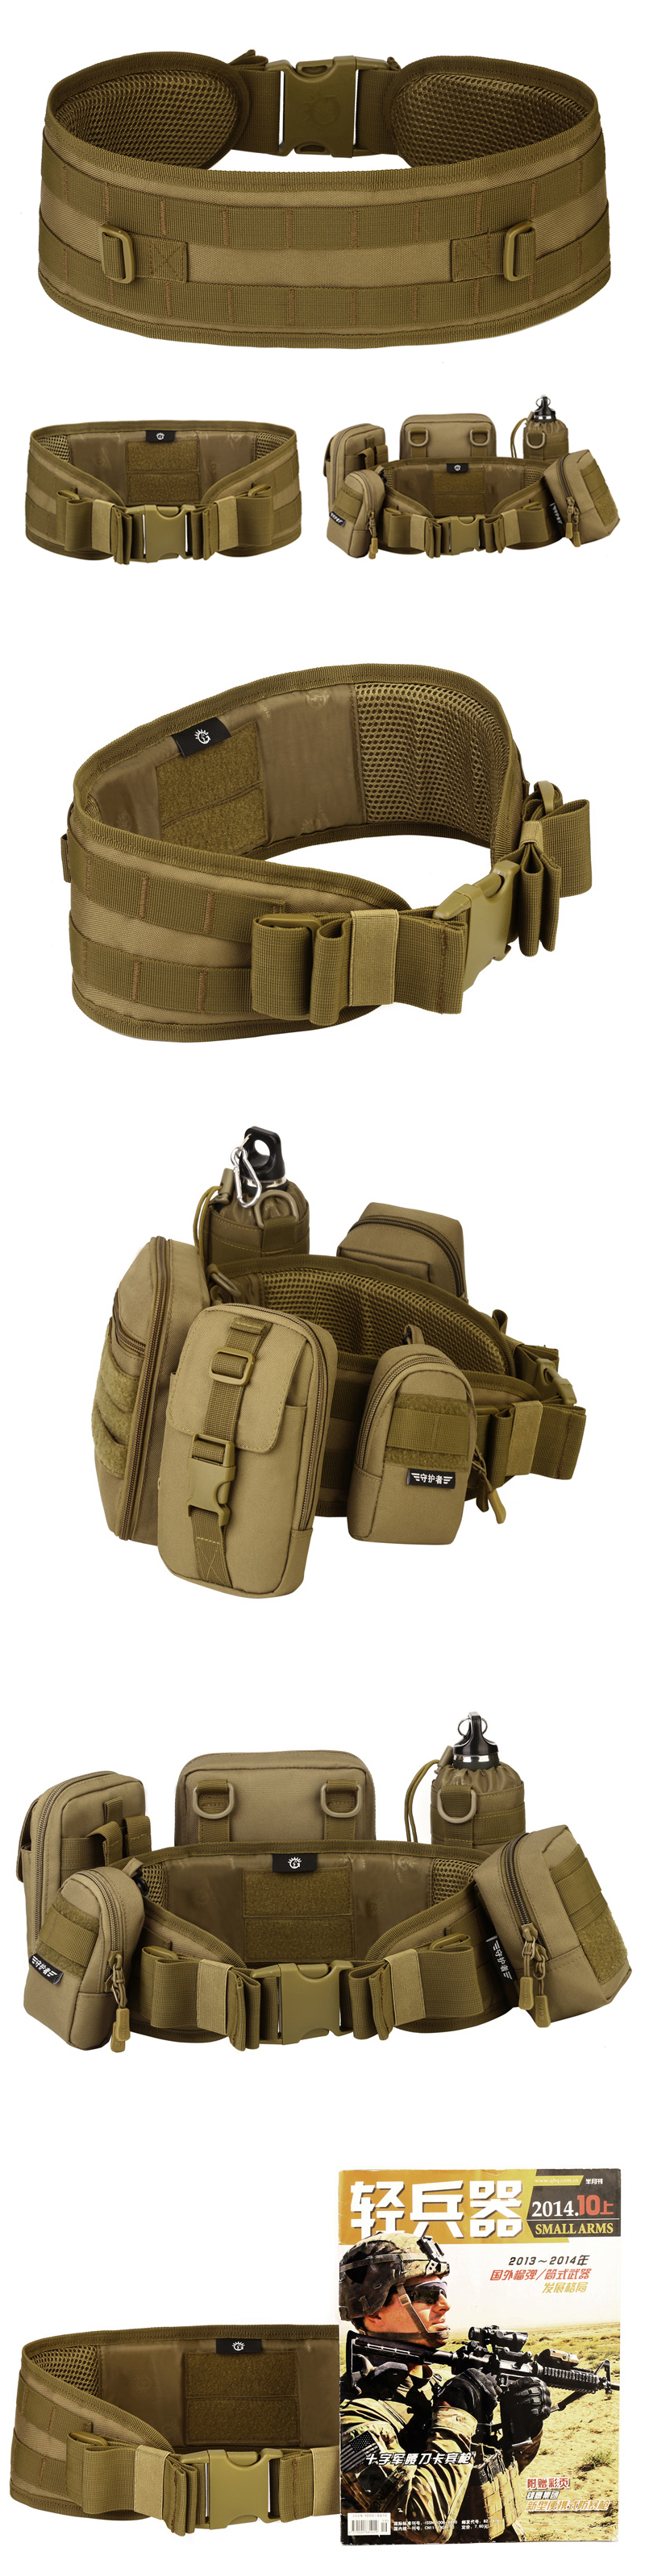 Protector-Plus-Molle-Tactical-Belt-Nylon-Belt-Waist-Holder-Outdoor-Sport-Hunting-Camping-Military-Wa-1442709-1